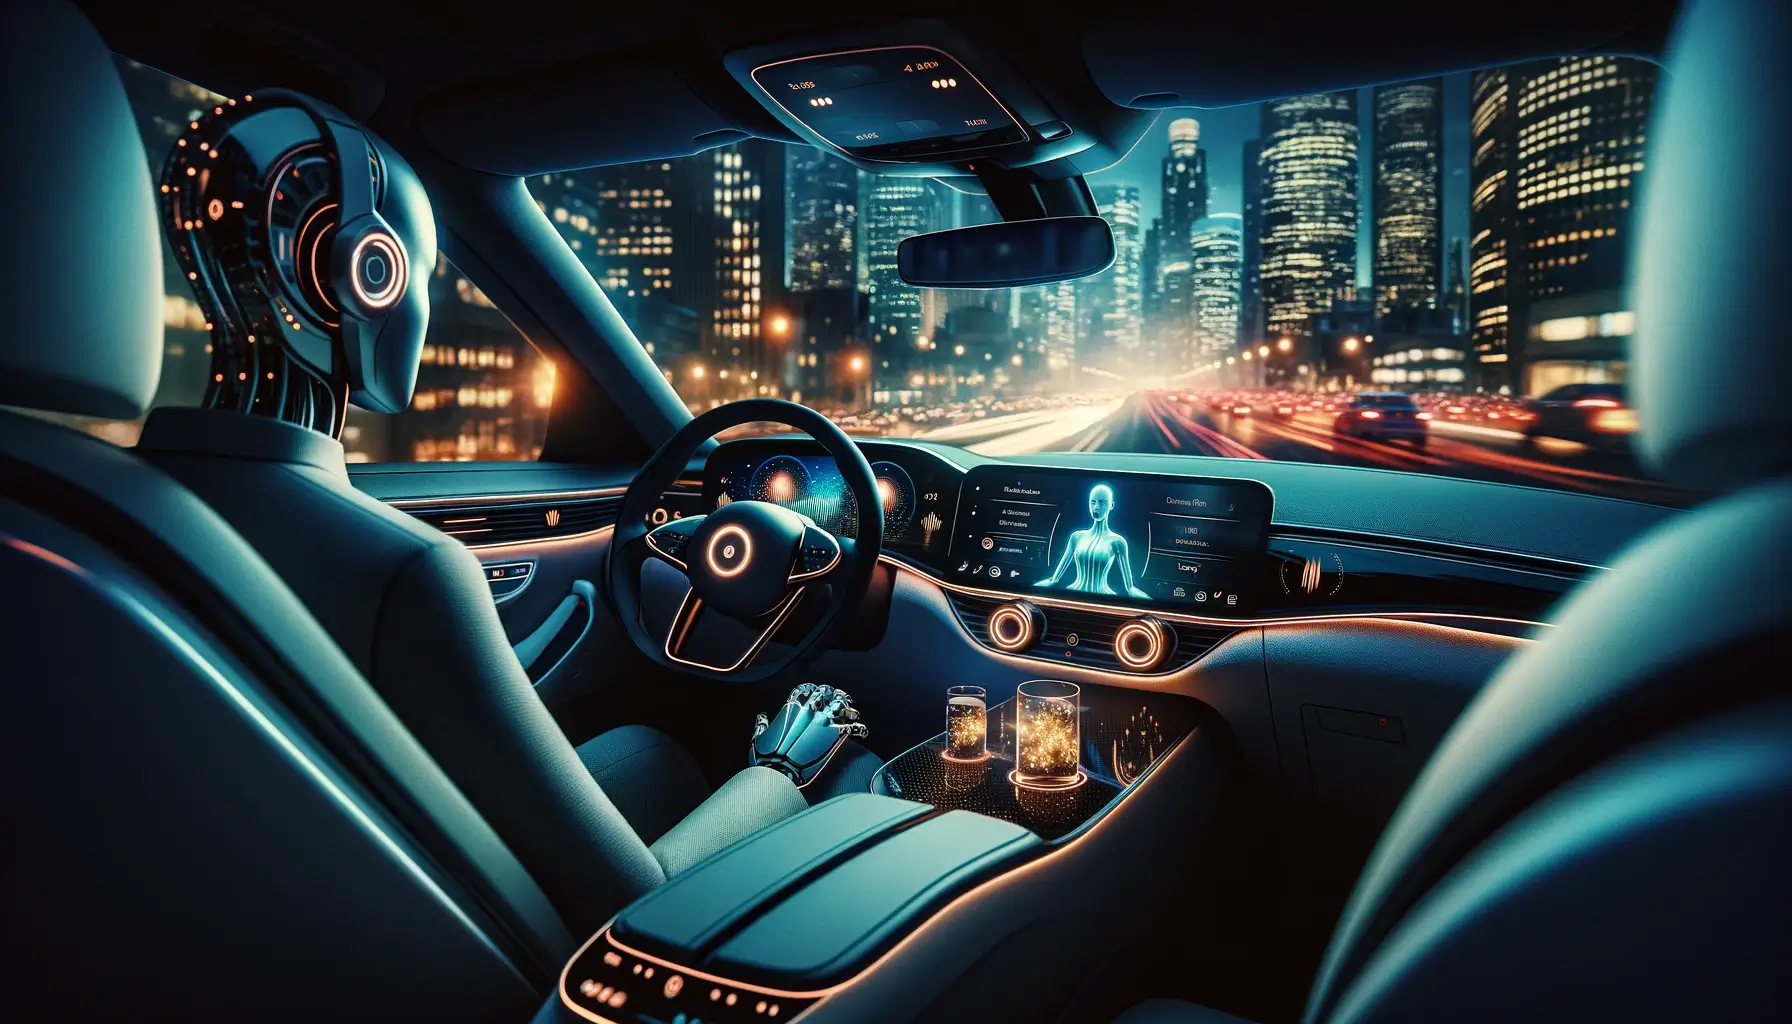 Futuristic car interior with an AI robot driver, interactive holographic display, and ambient lighting, showcasing advanced technology in a city night setting.